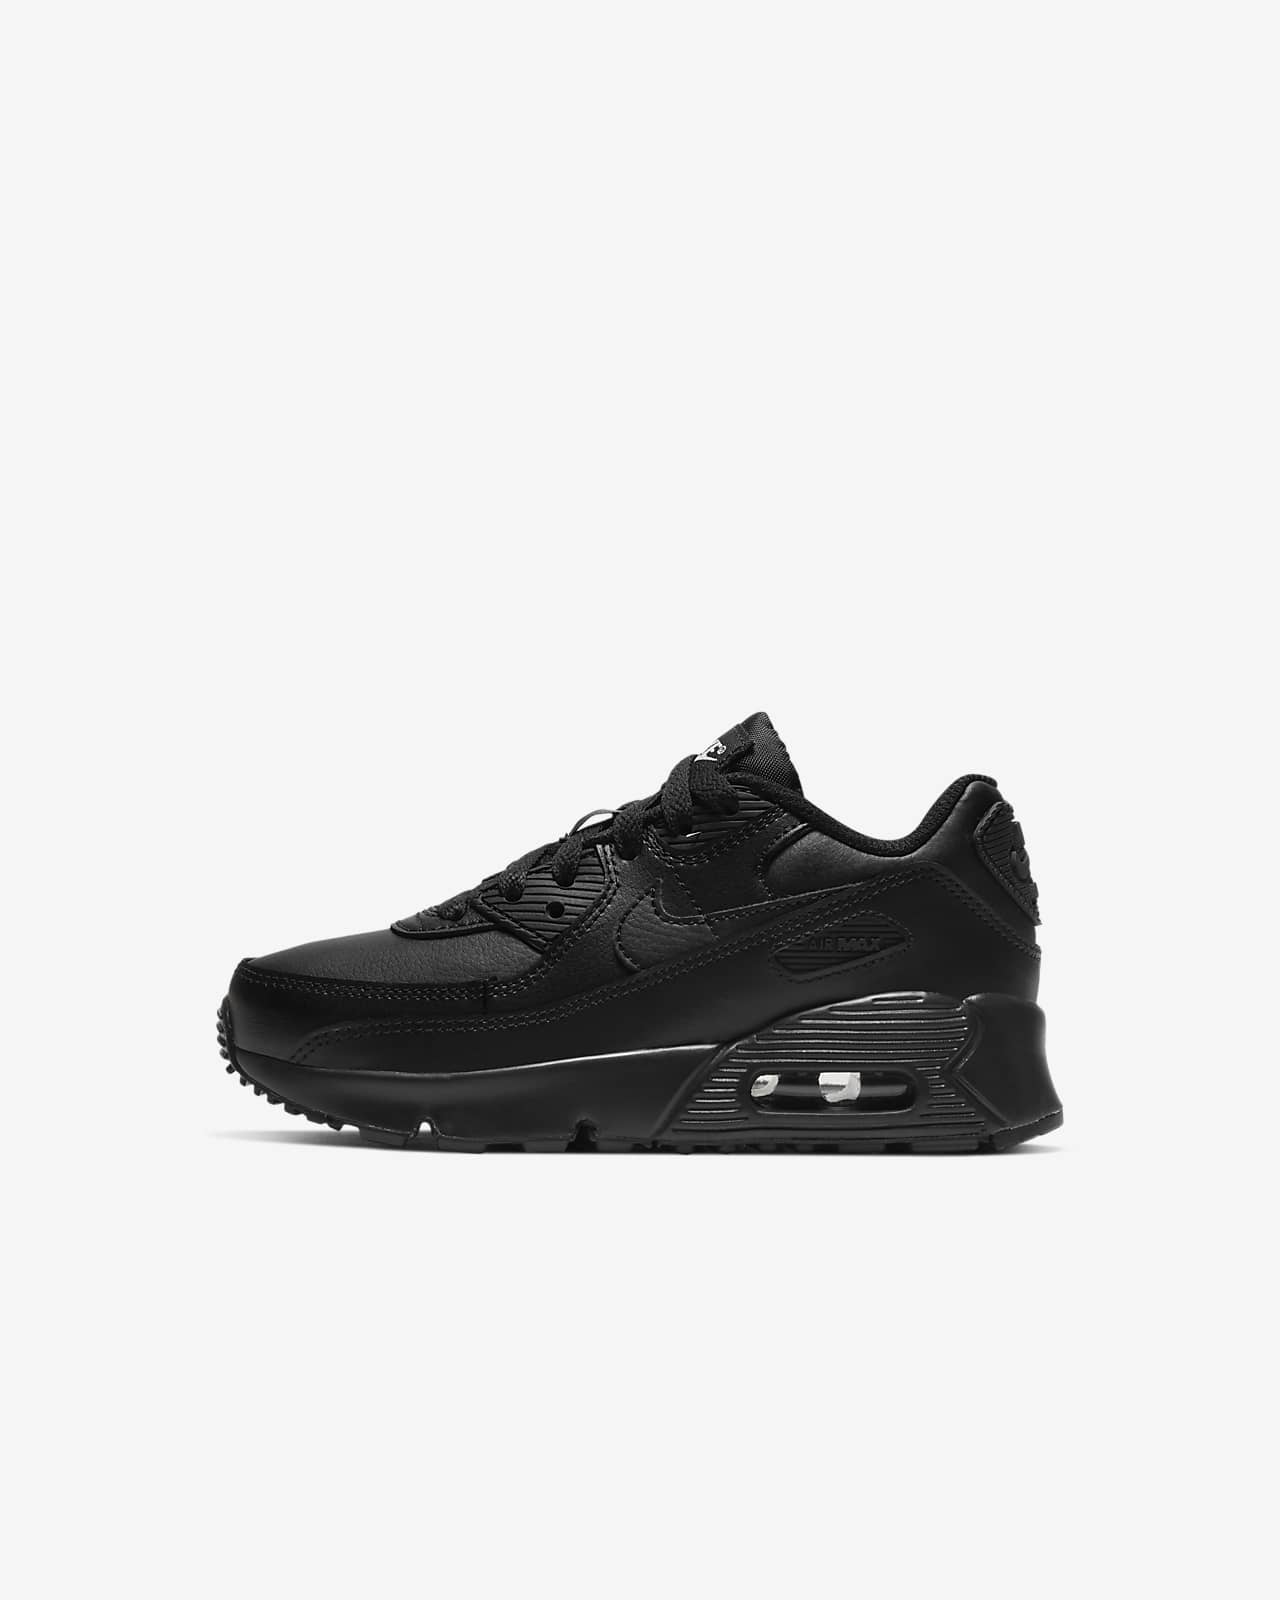 Nike Air Max 90 Younger Kids' Shoe